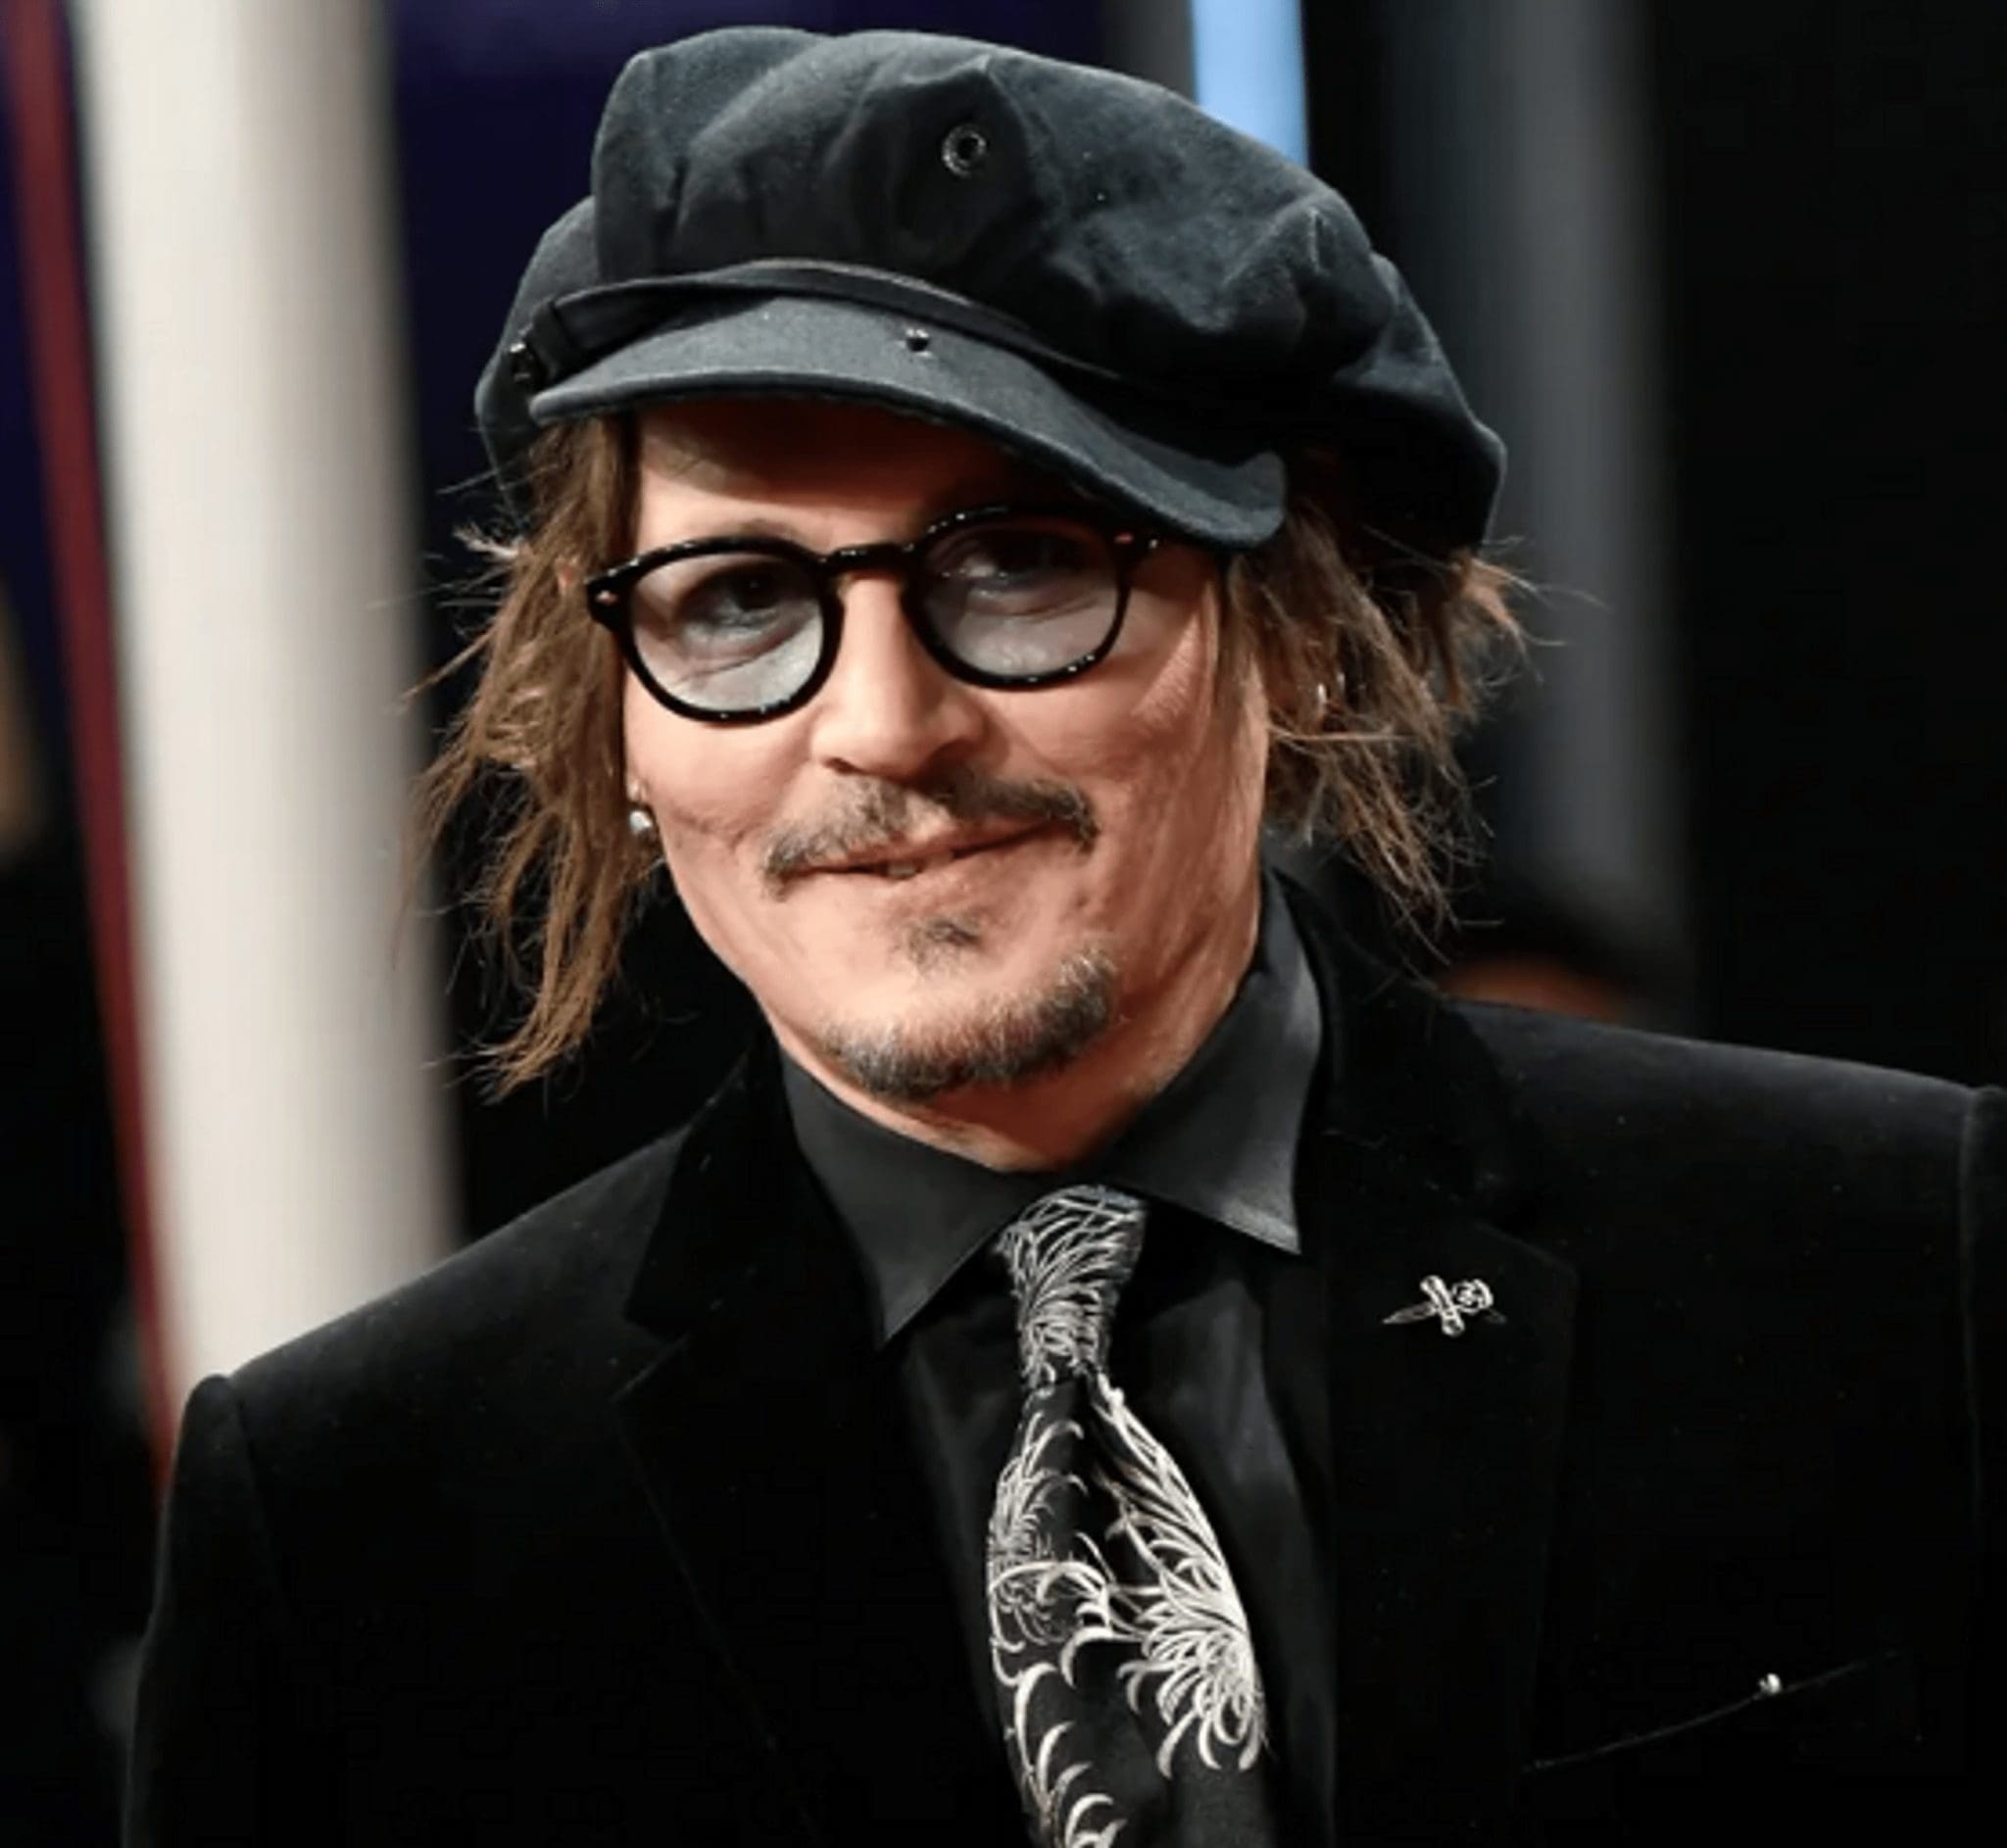 Johnny Depp Appears To Be Prepared To Return To The Cheers And Grins Of His Followers